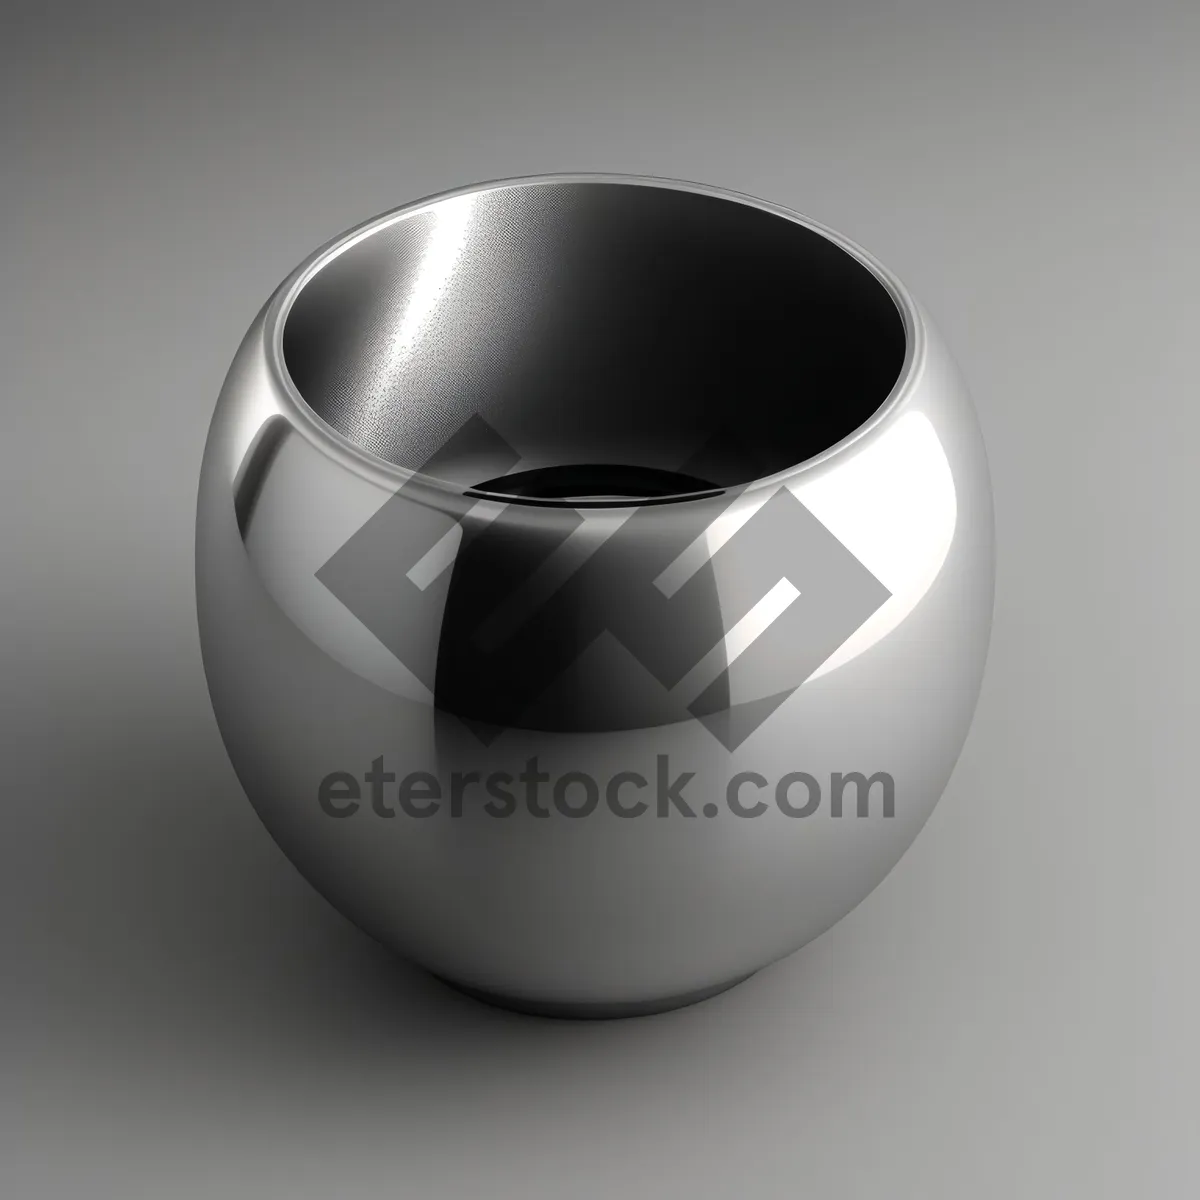 Picture of Bangle Cup: Shiny Glass Relief Symbol